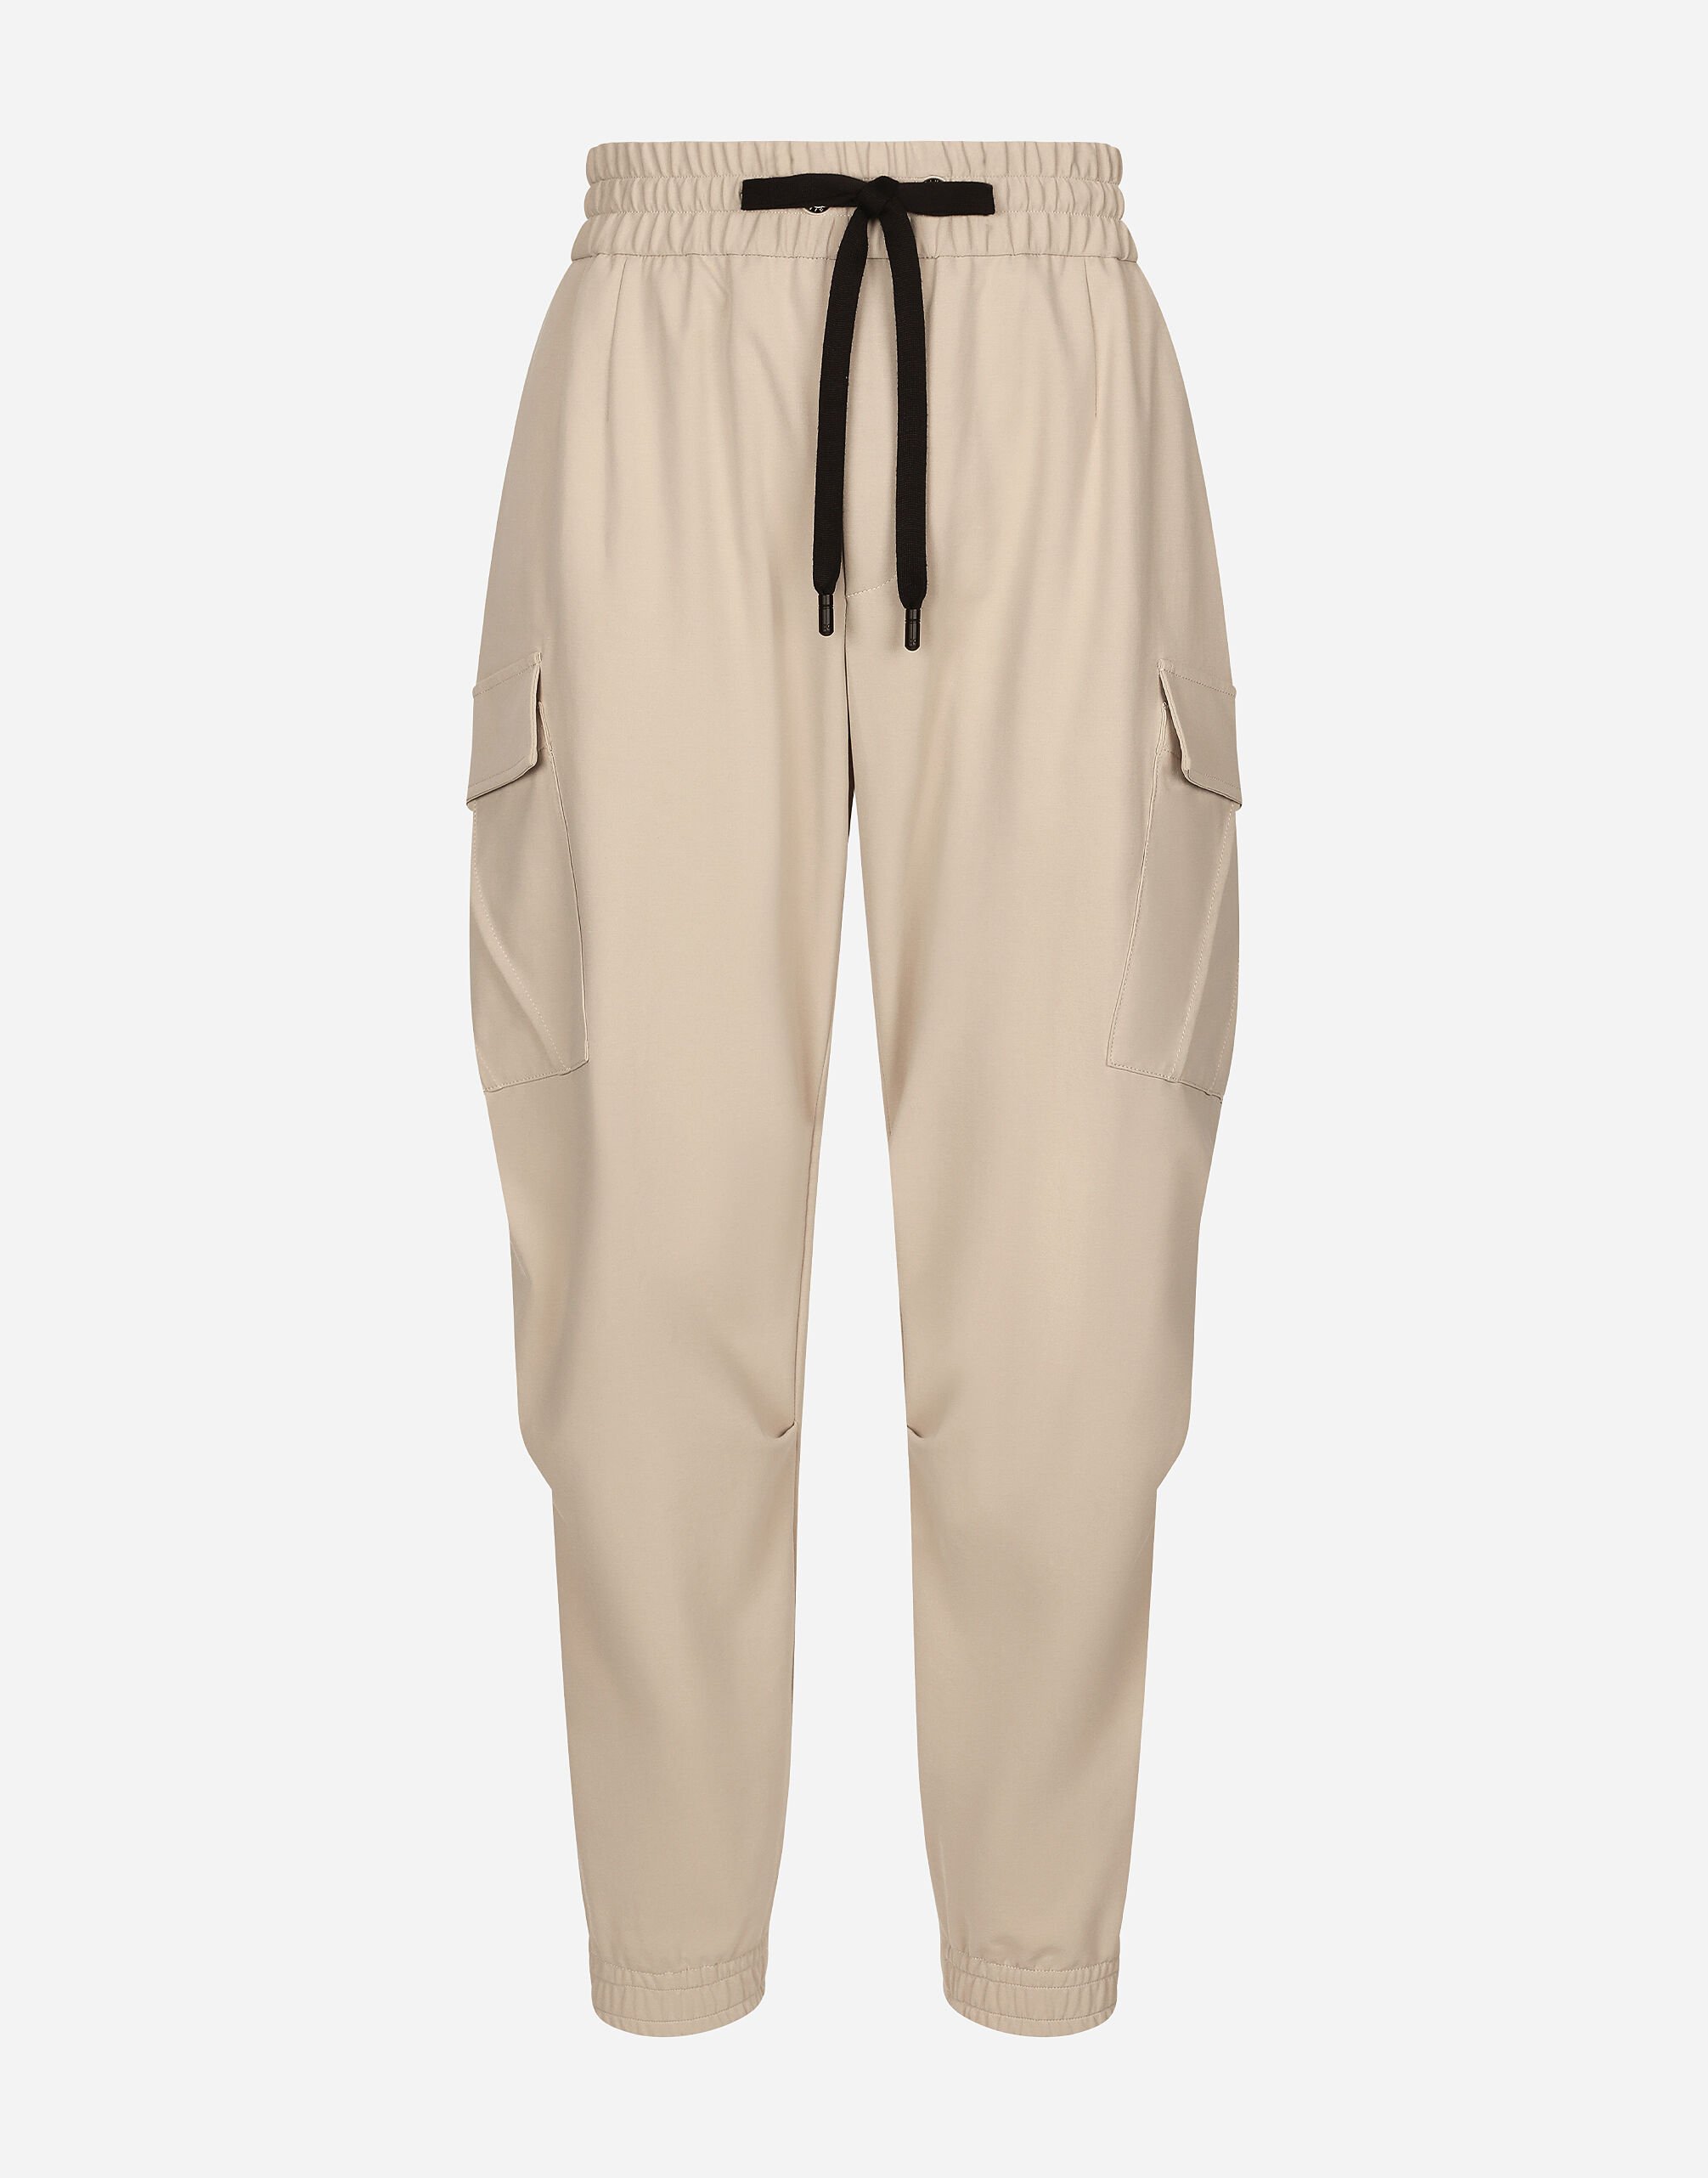 Dolce & Gabbana Stretch cotton cargo pants with tag Beige G9AOGTGH459